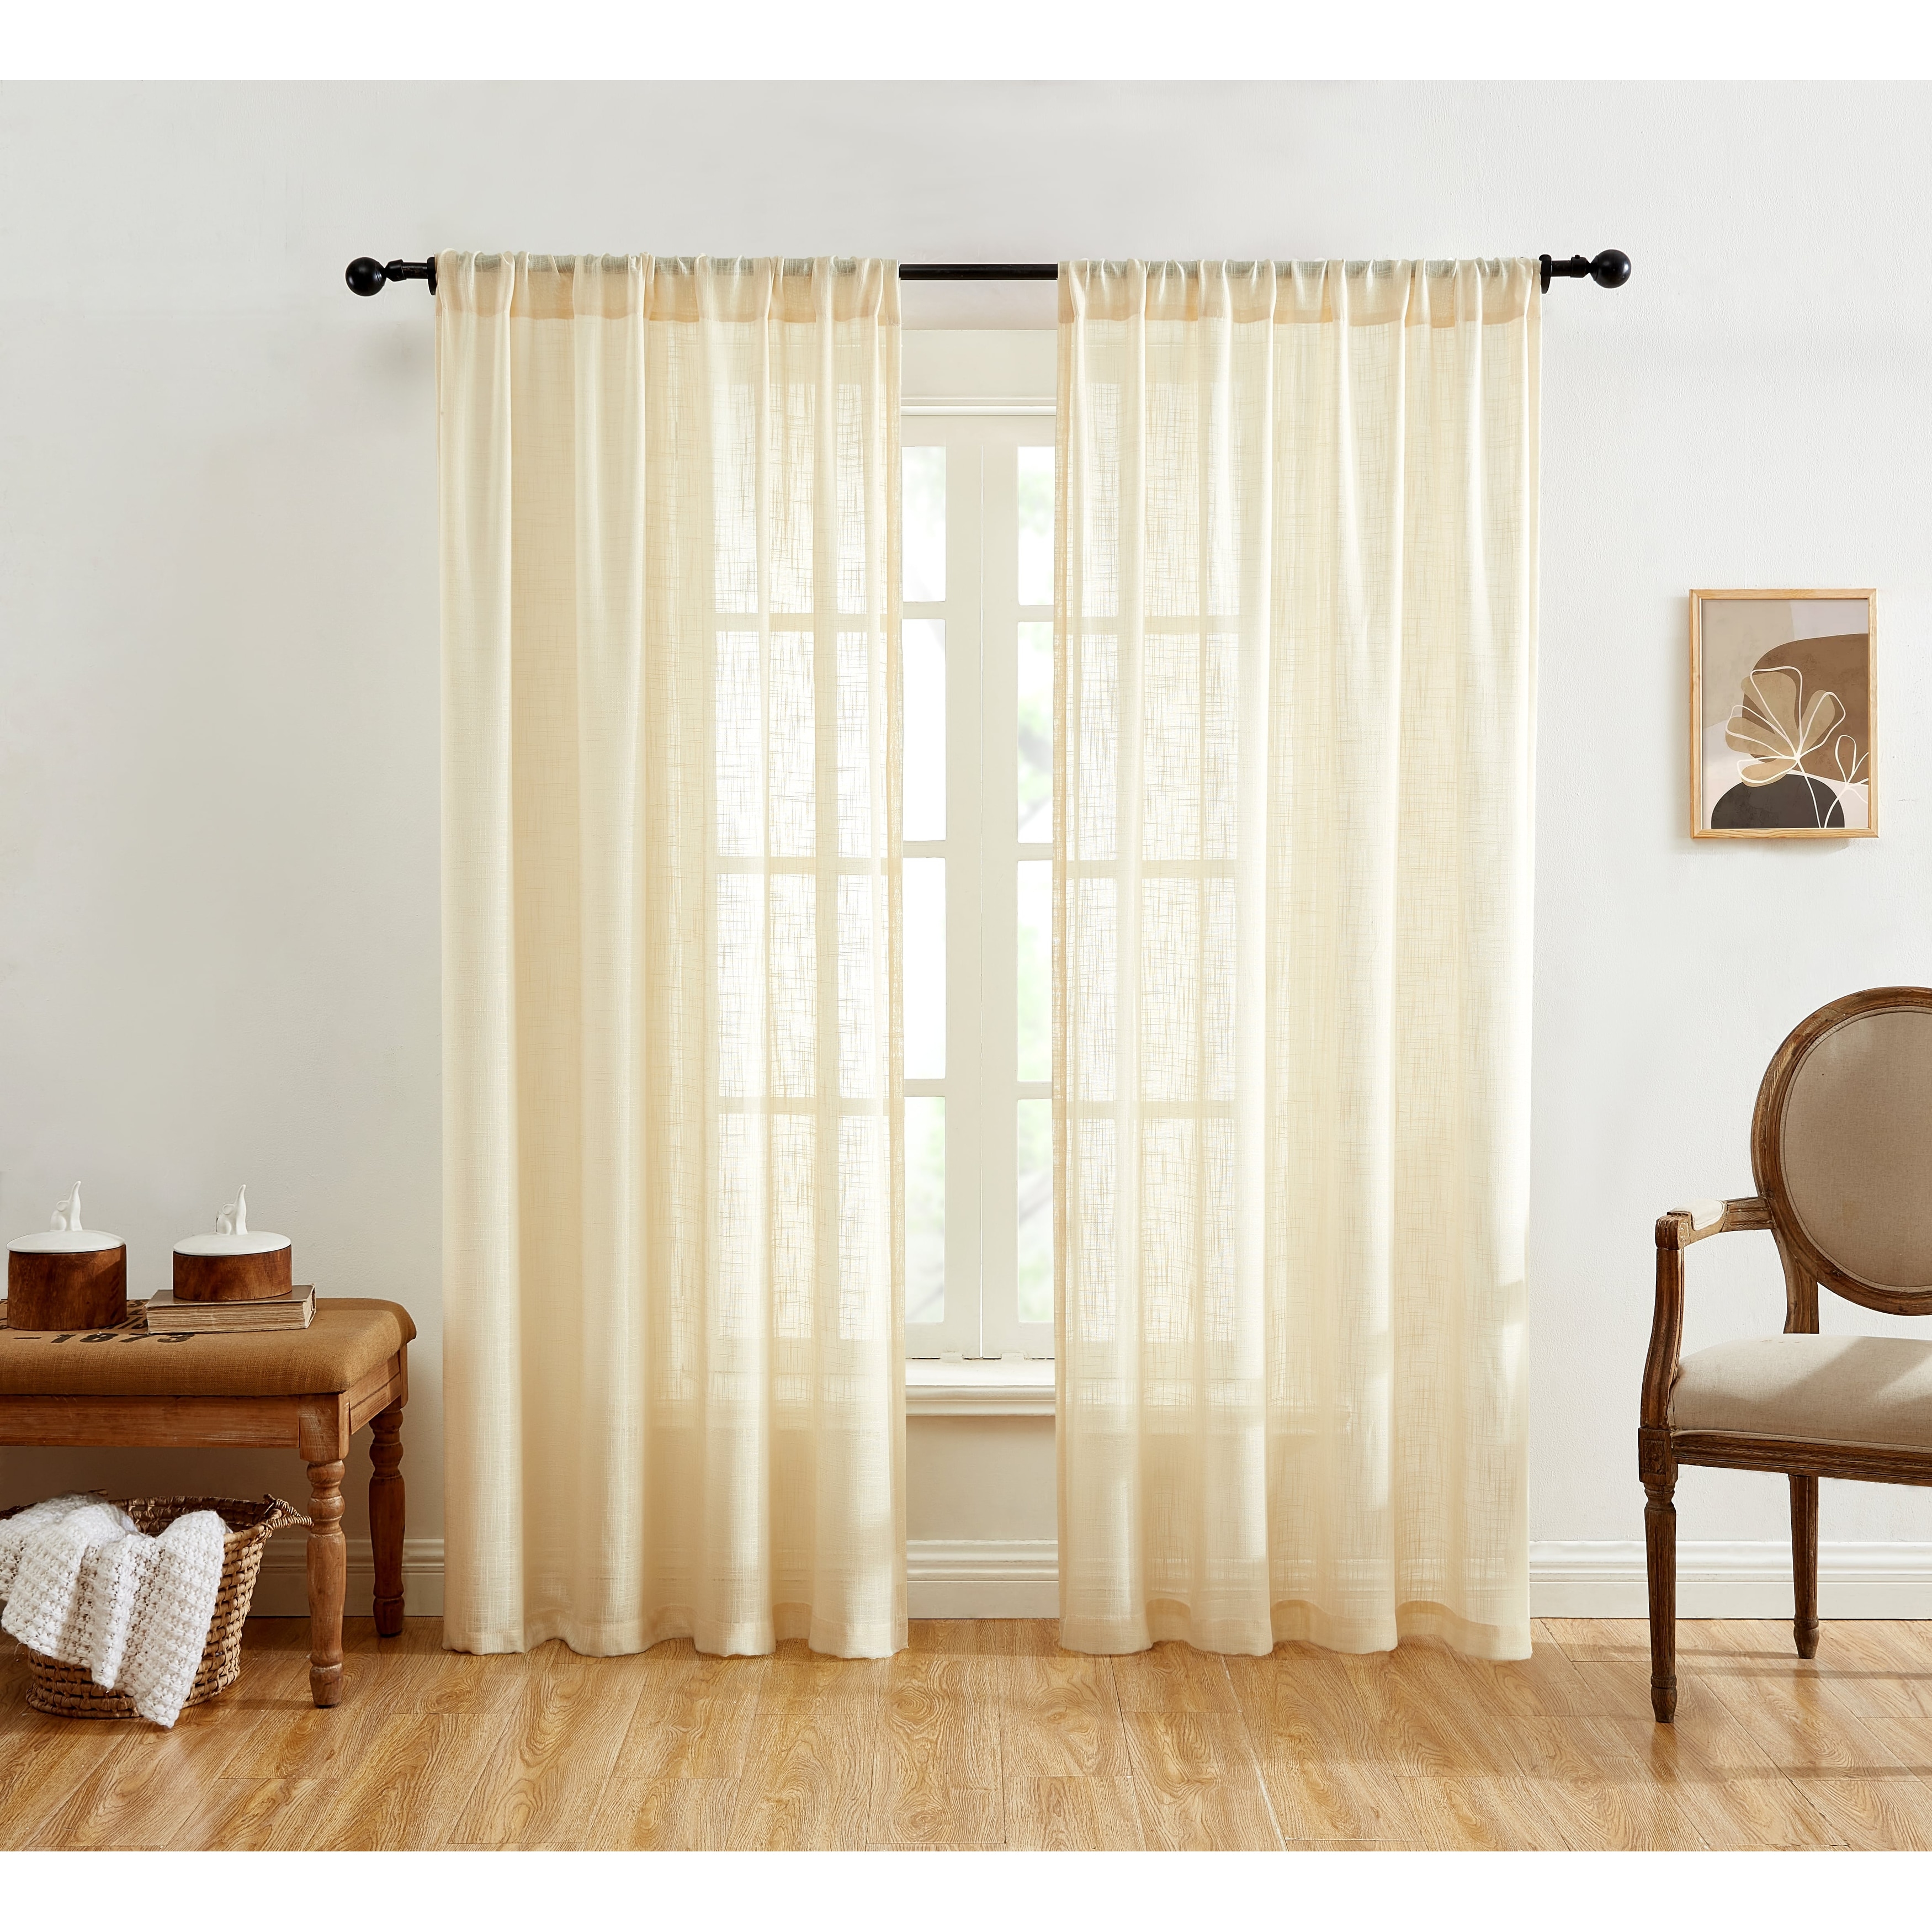 Window Sheer Curtains 84 Inches Long 2 Panels White Sheer Curtain Clear  Transparent Basic Rod Pocket Panel 15 Colors 10 Size for Bedroom Living  Room